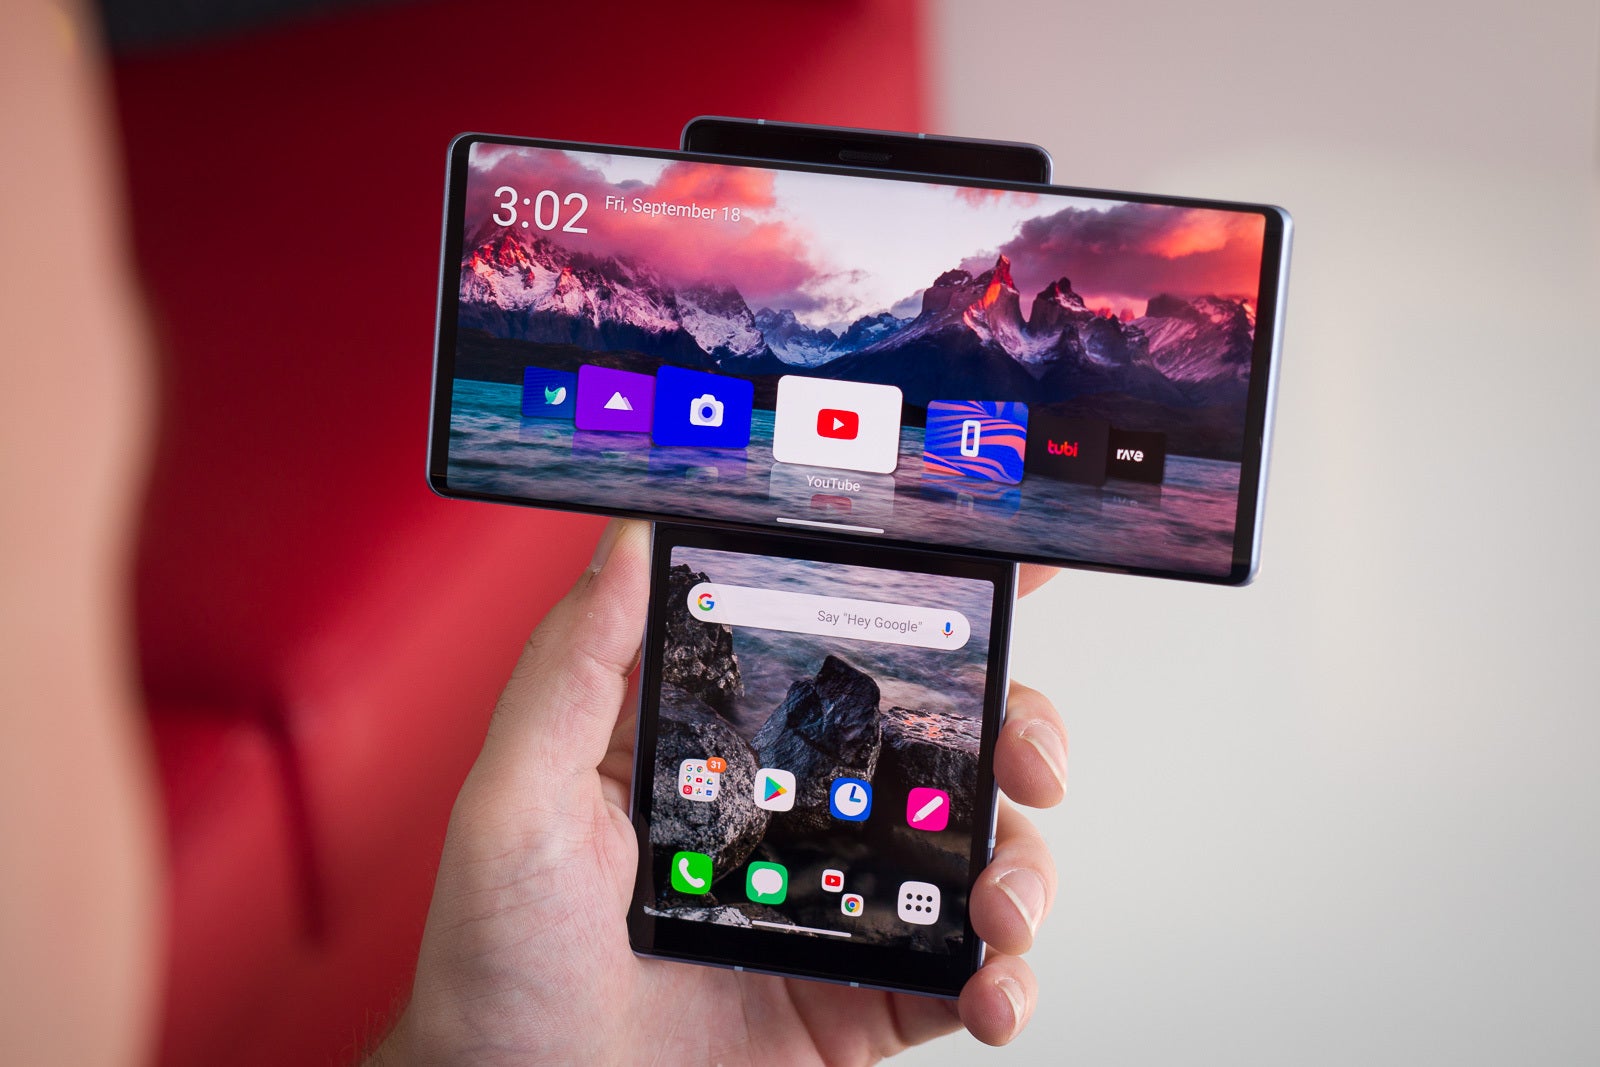 LG was famous for its smartphone experiments. Here we see the LG Wing with its two displays - LG announces foldable display coating that is as hard as glass, reduces creasing